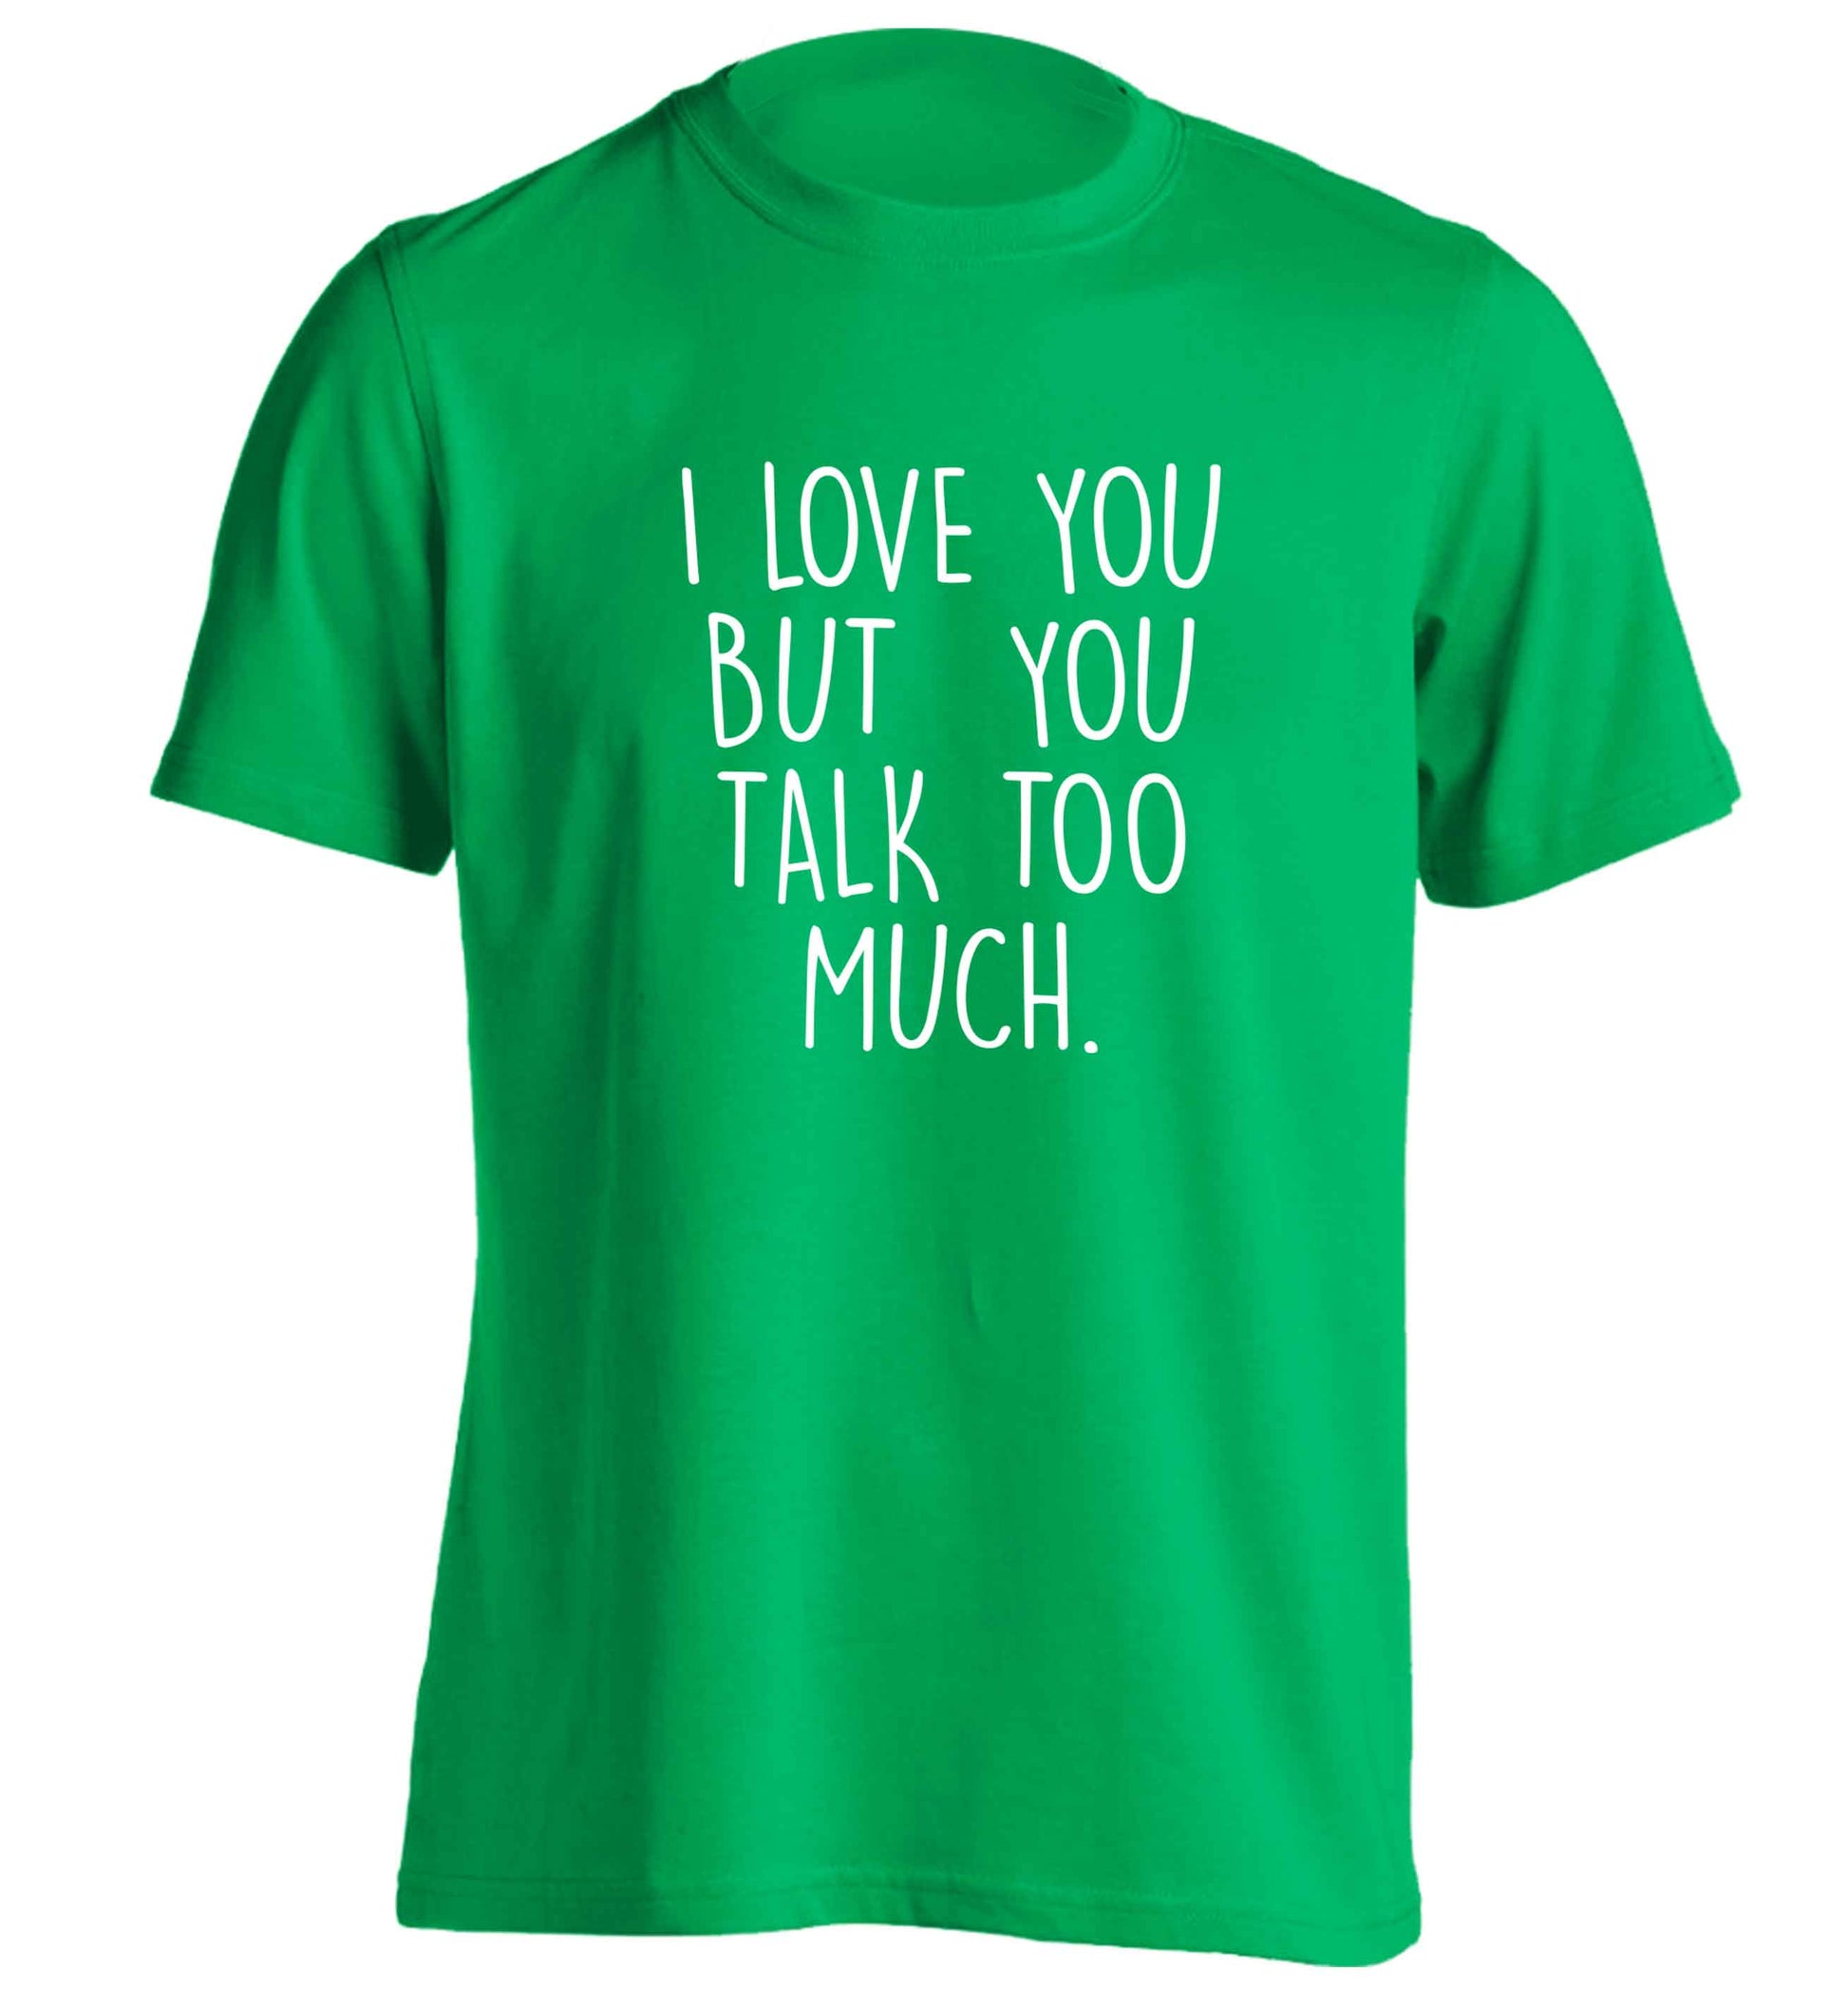 I love you but you talk too much adults unisex green Tshirt 2XL